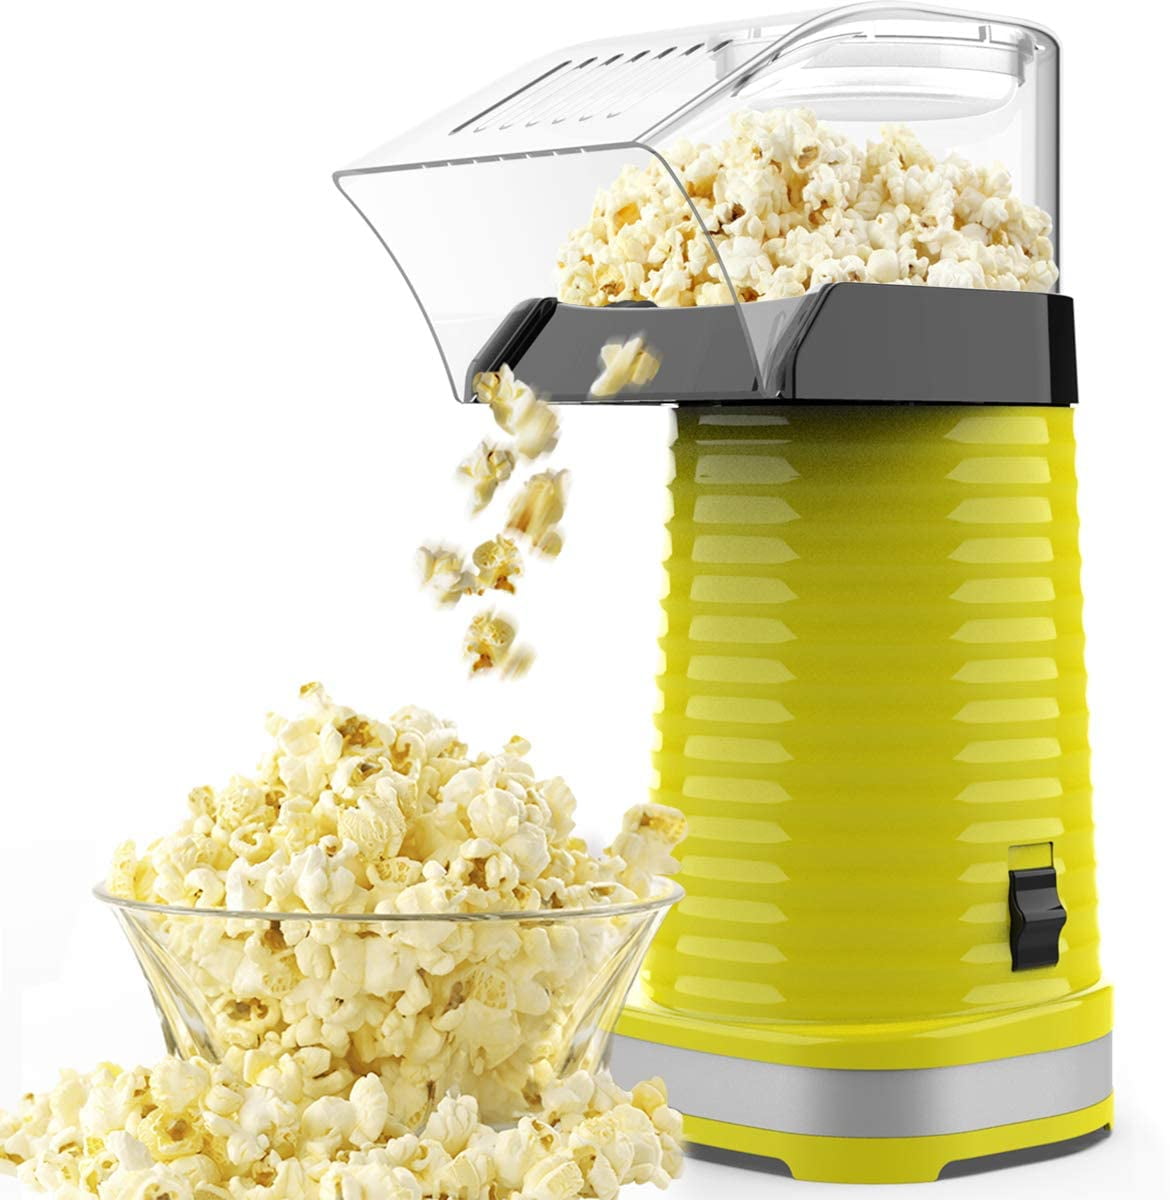 Vminno 1200W Fast Hot Air Popcorn Popper - 4.5 Quarts, Electric Popcorn  Machine with Measuring Cup - Safety ETL Approved, BPA-Free, Air Popper  Popcorn